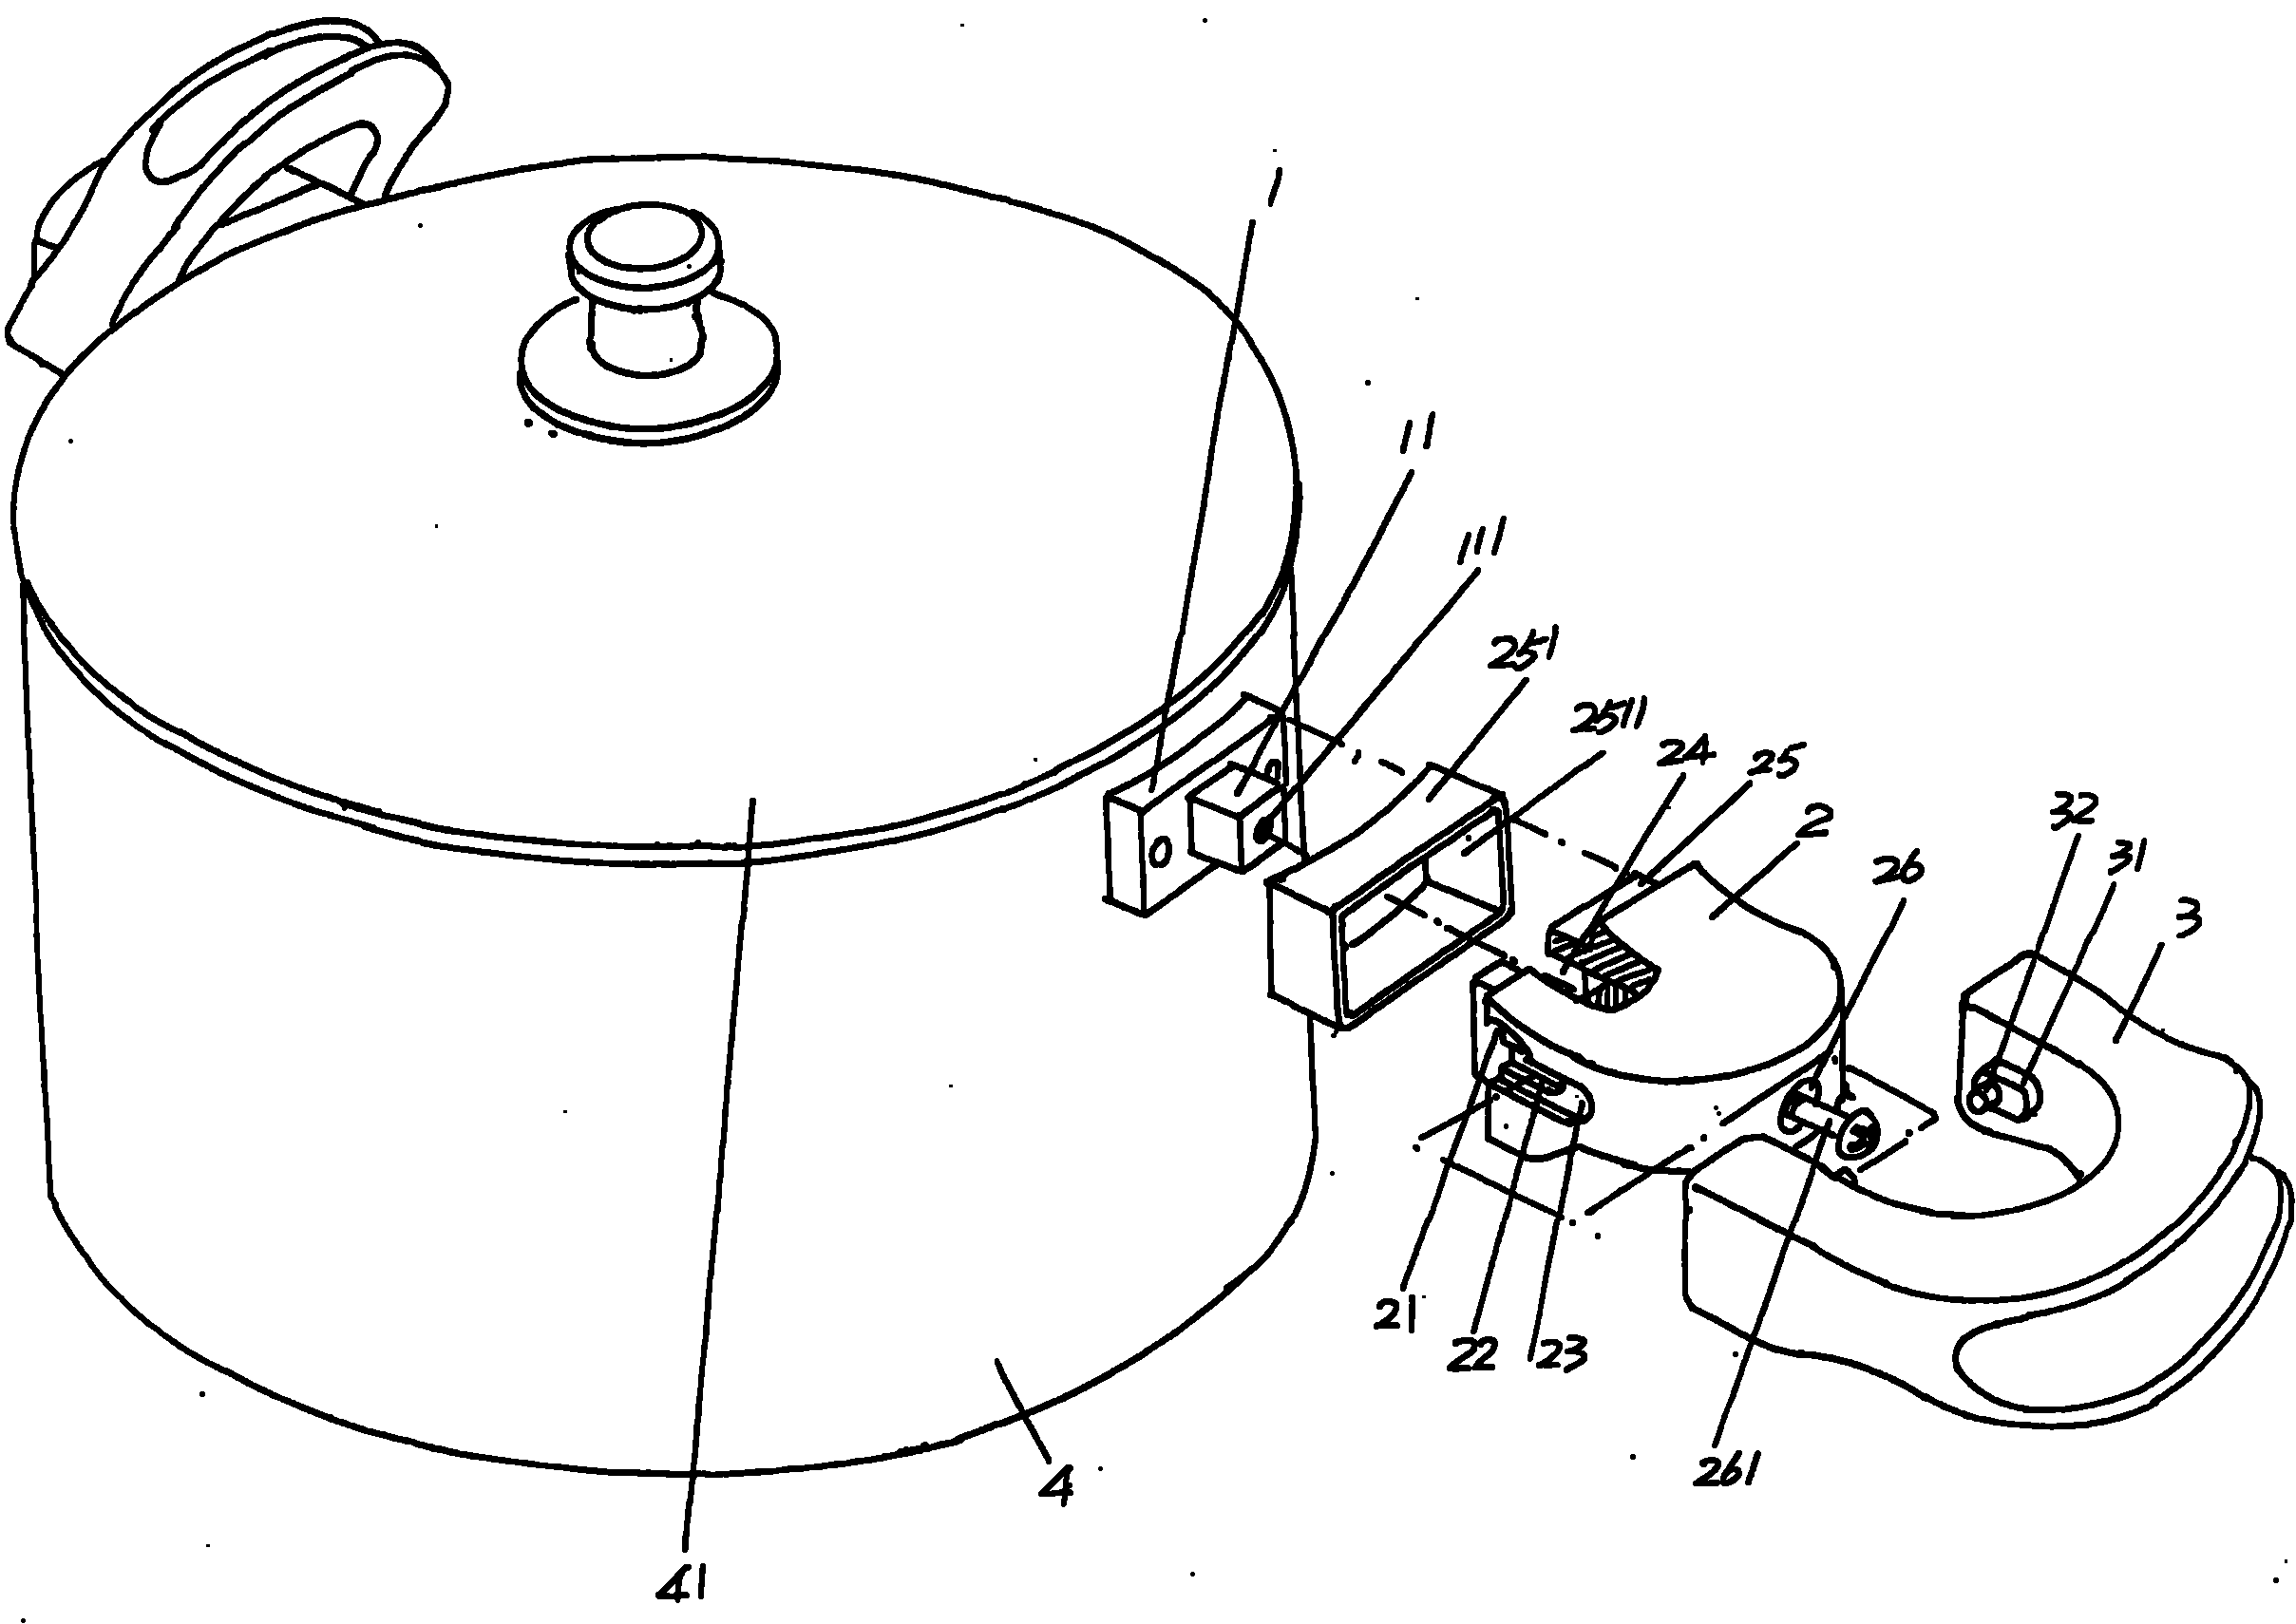 Cover-pressing handle for pot